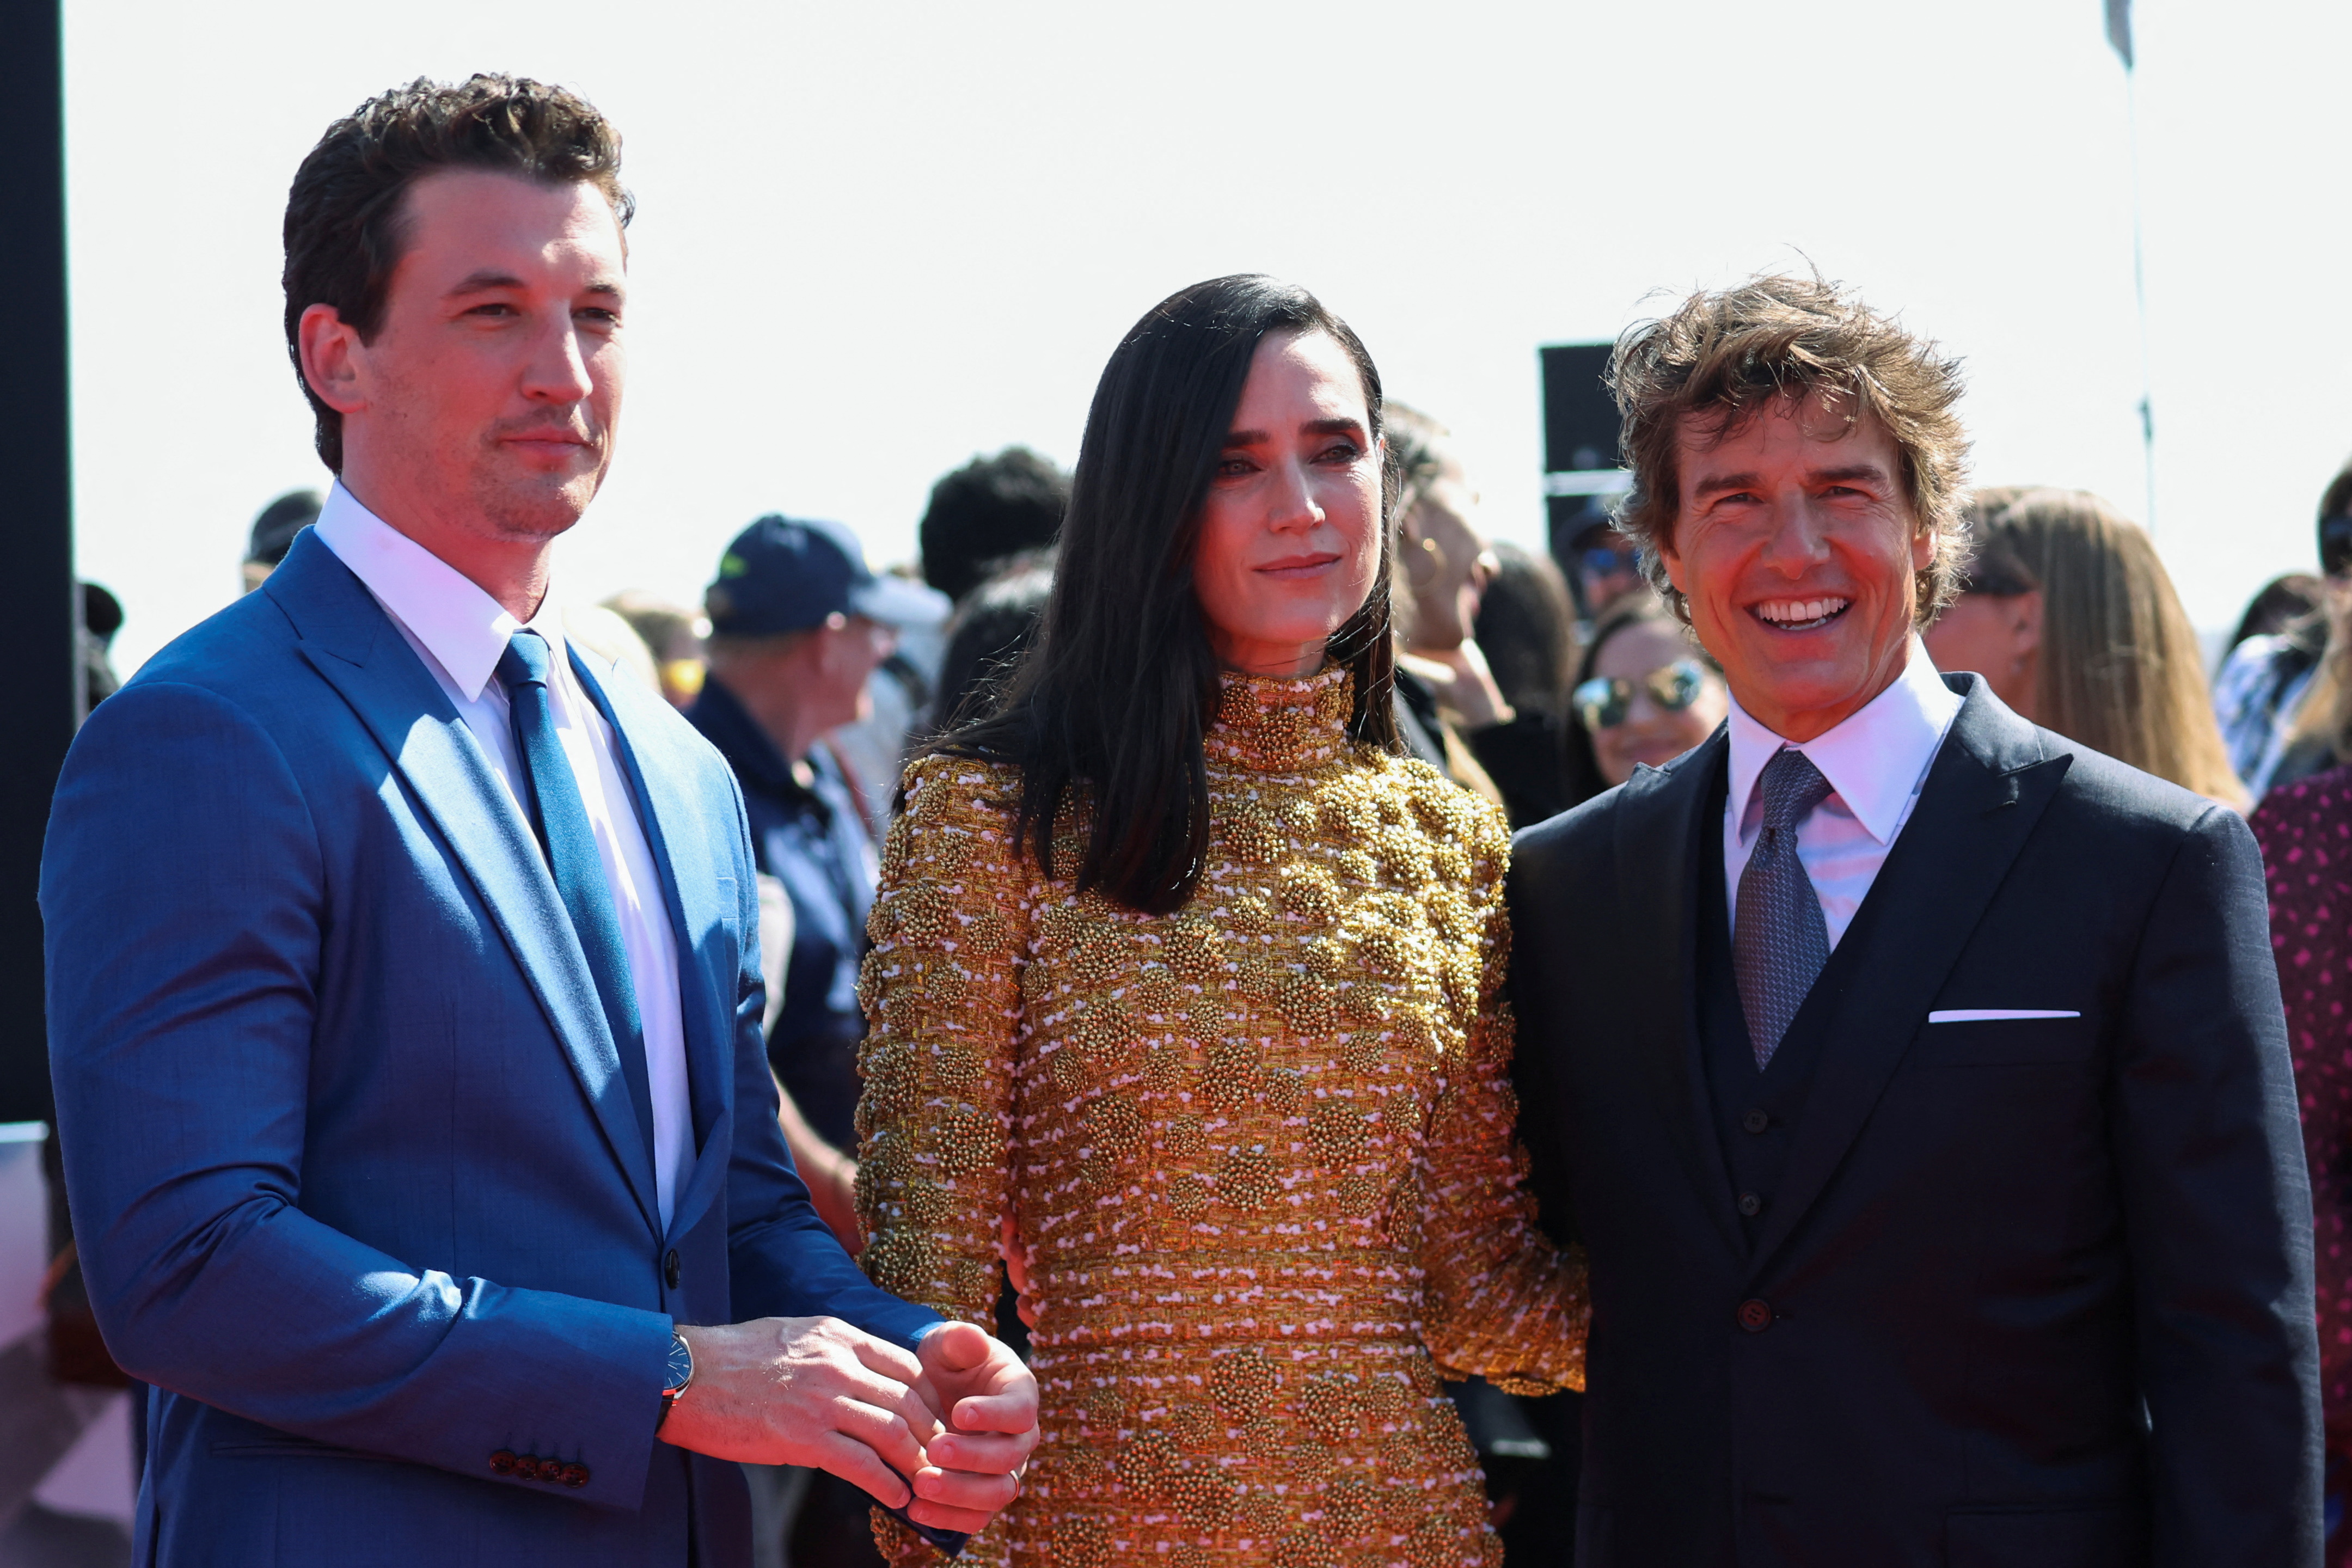 Cast members Miles Teller, Jennifer Connelly and Tom Cruise attend the premiere (Reuters)